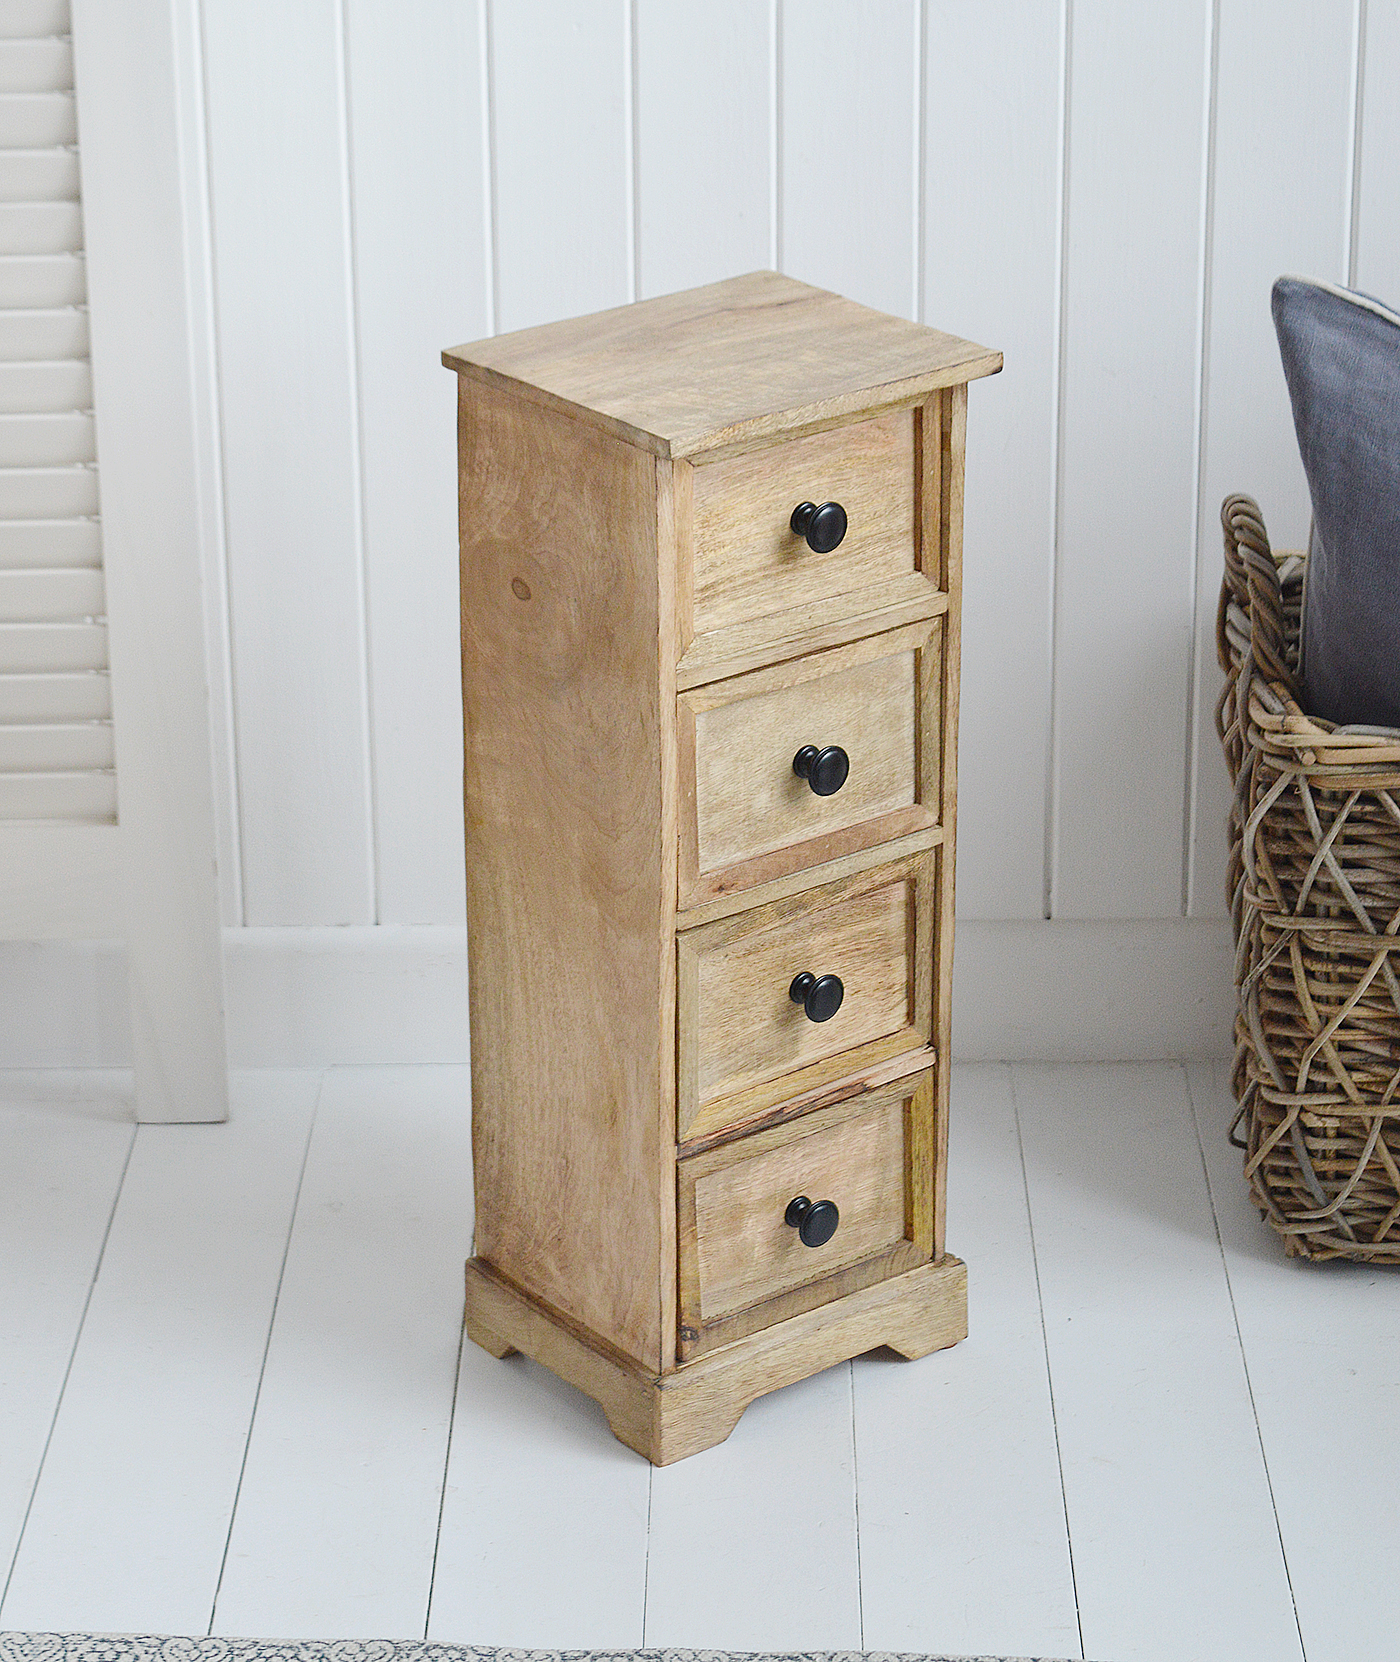 The White Lighthouse living room furniture. Dorset narrow cabinet or lamp table with drawers for living room storage 23cm wide. New England furniture for coastal, country and modern farmhouse styled homes and interiors